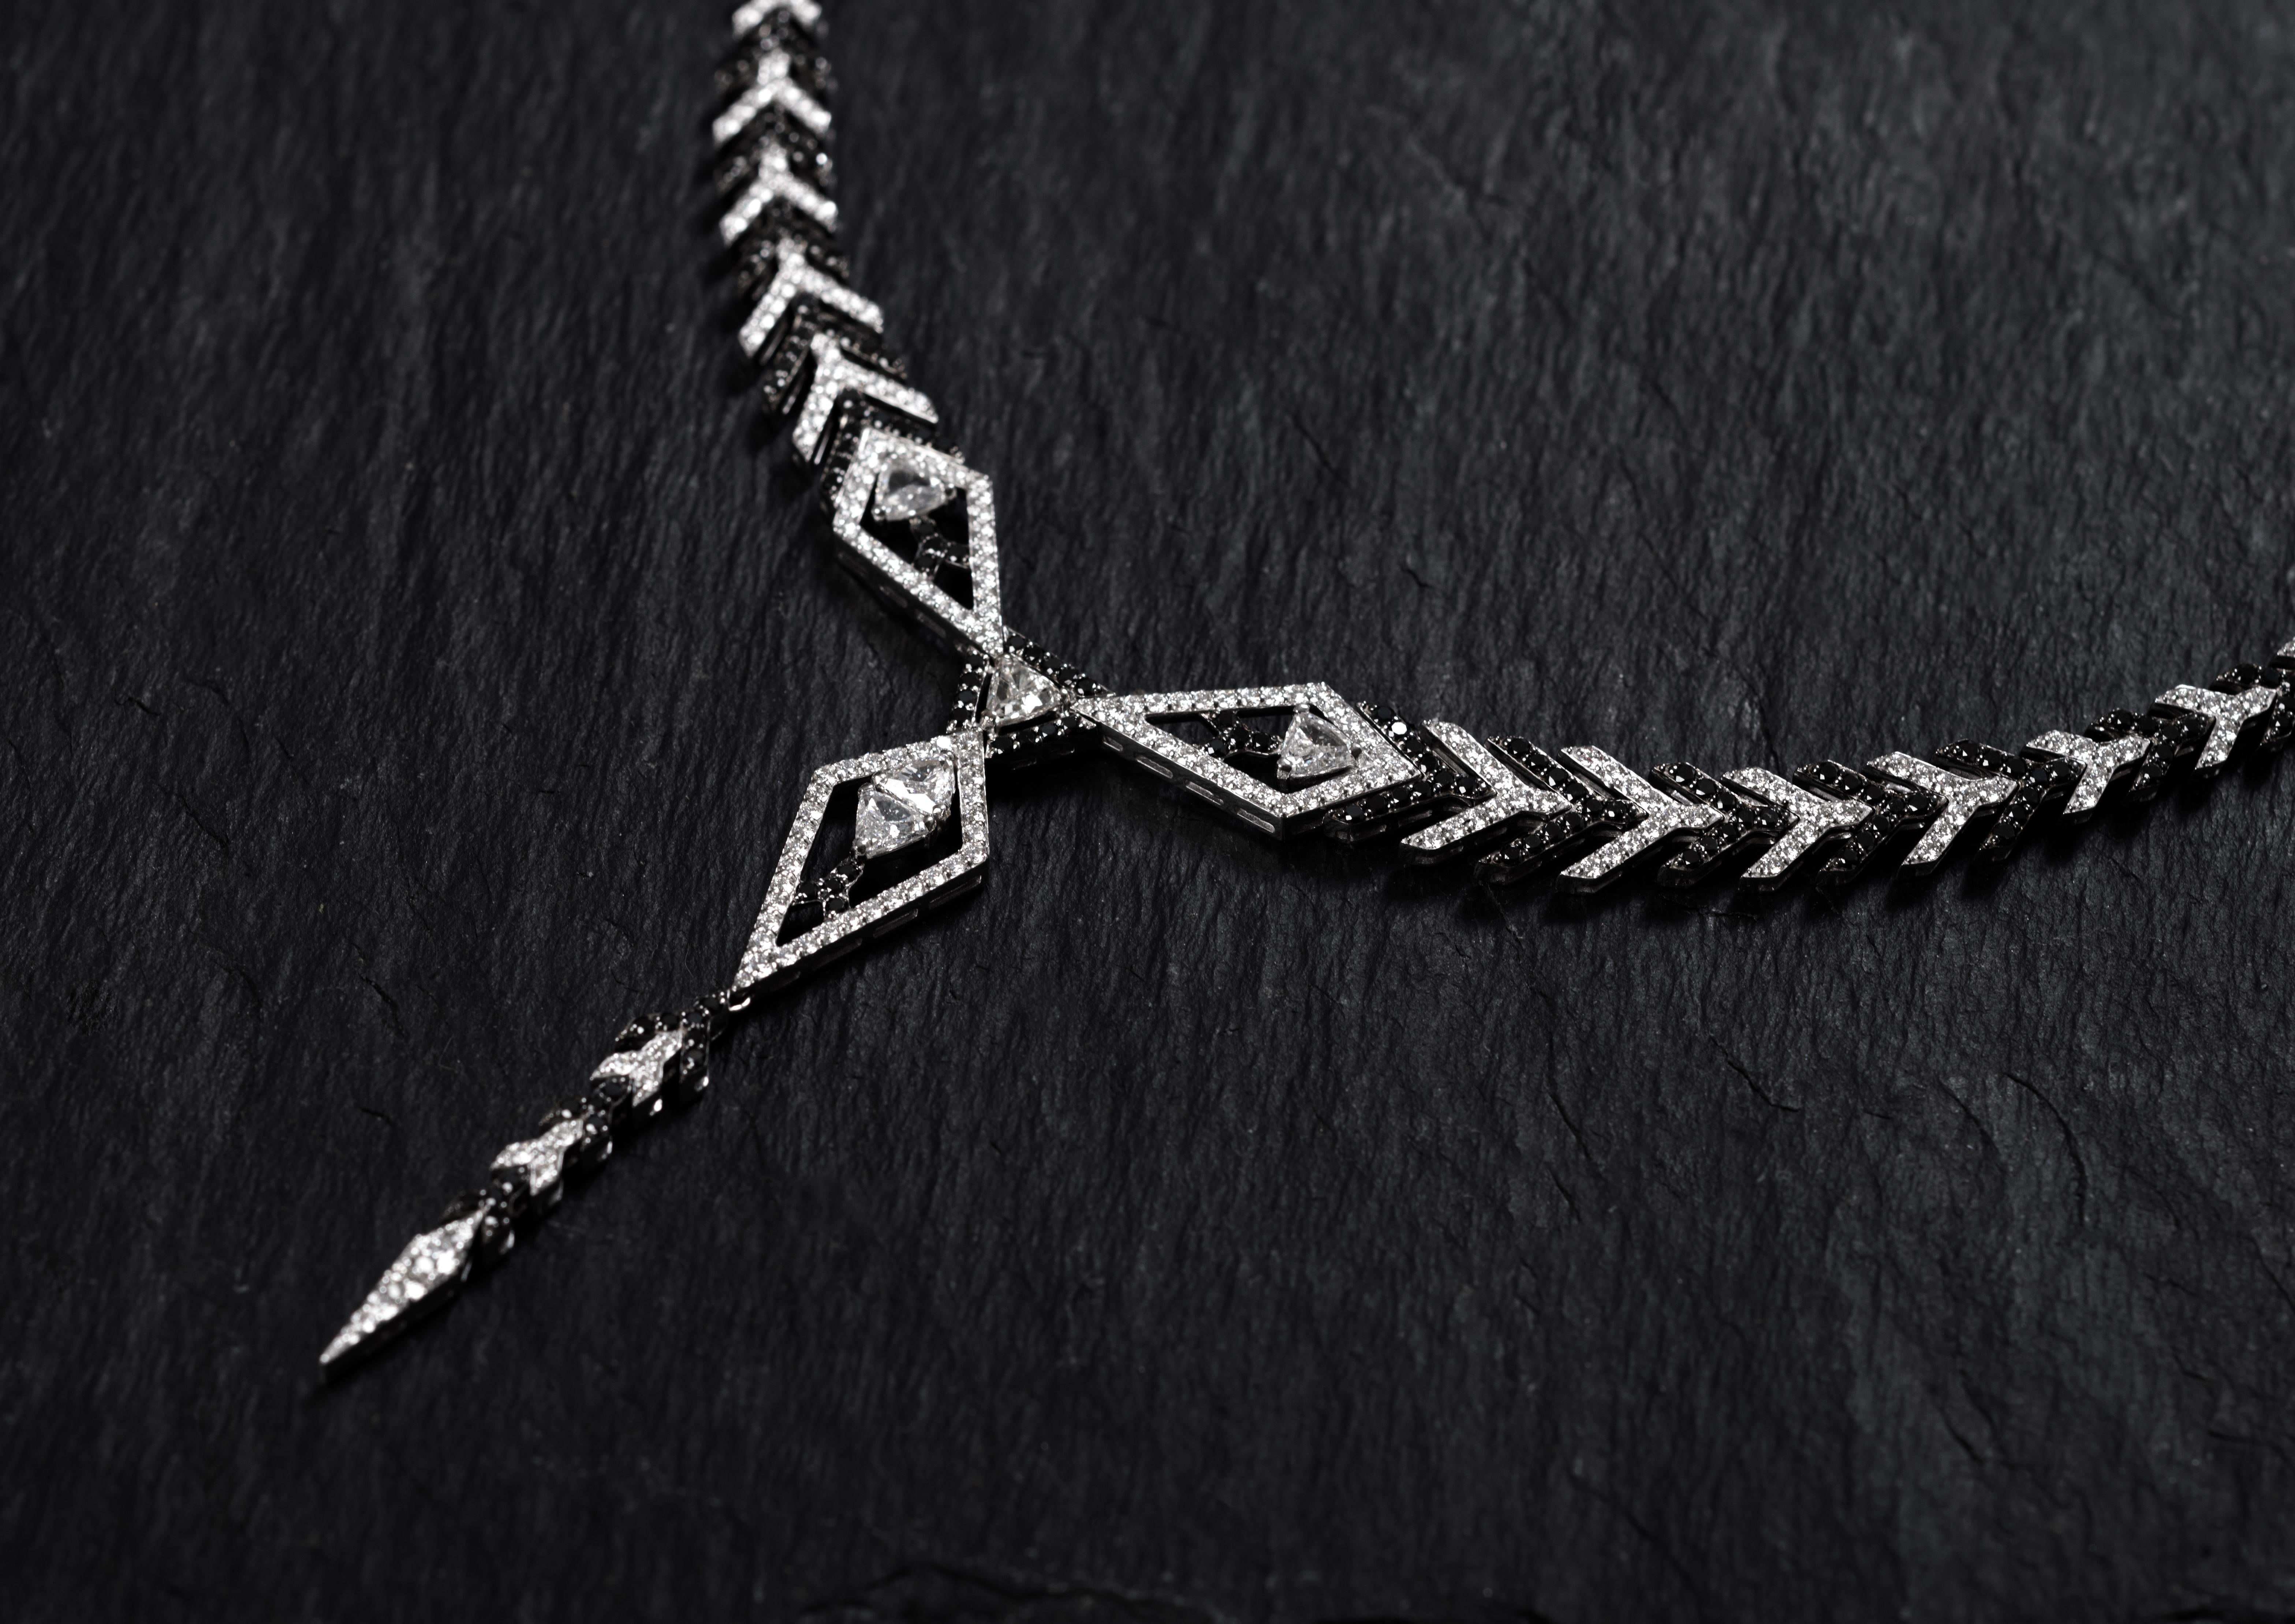 The ethos behind this striking collection lies in the empowerment of women, the unleashing of their super powers. Amara is better known as the eternally strong and beautiful. Inspired by armour, weapons and stars, using Trillion cut diamonds, black